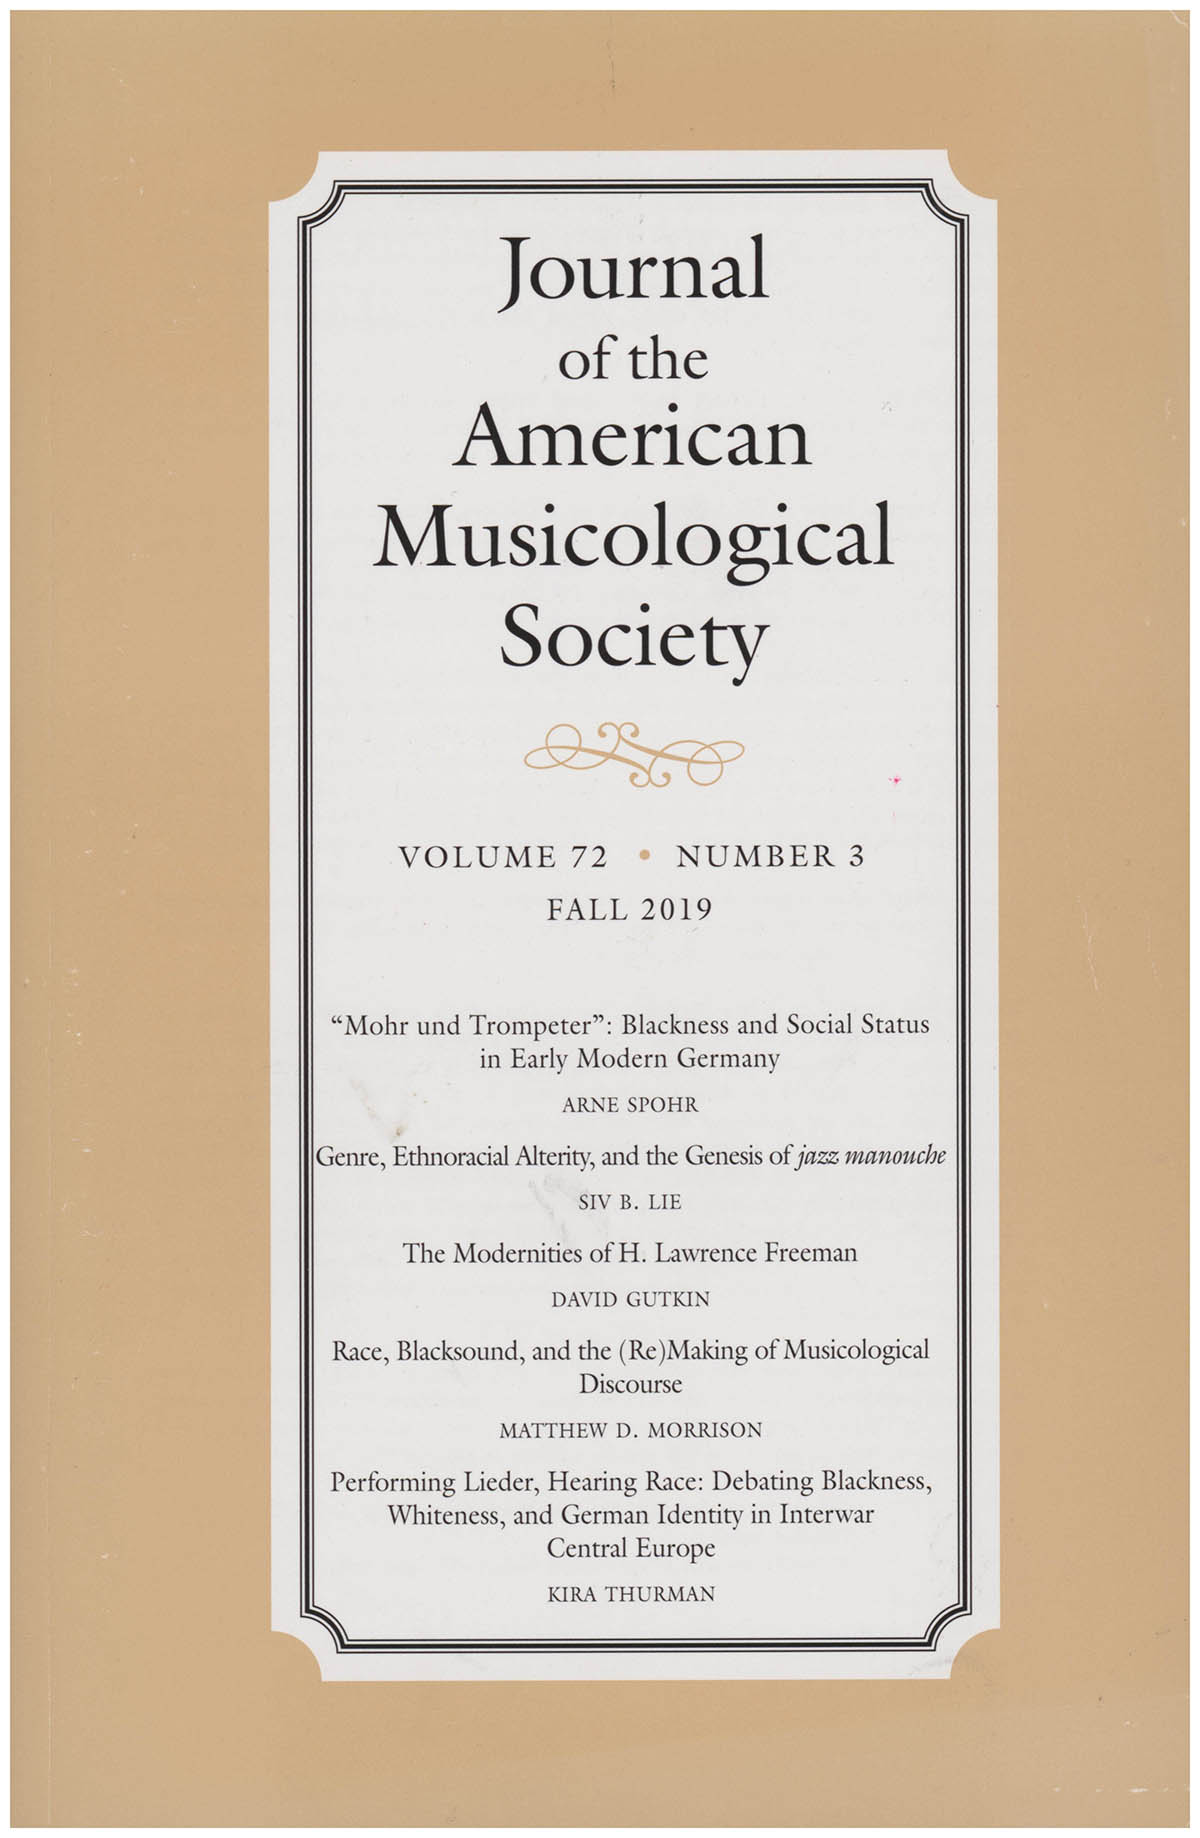 Calico, Joy H. (editor) - Journal of the American Musicological Society: Music, Race, and Ethnicity (Volume 72, Number 2, Fall 2019)